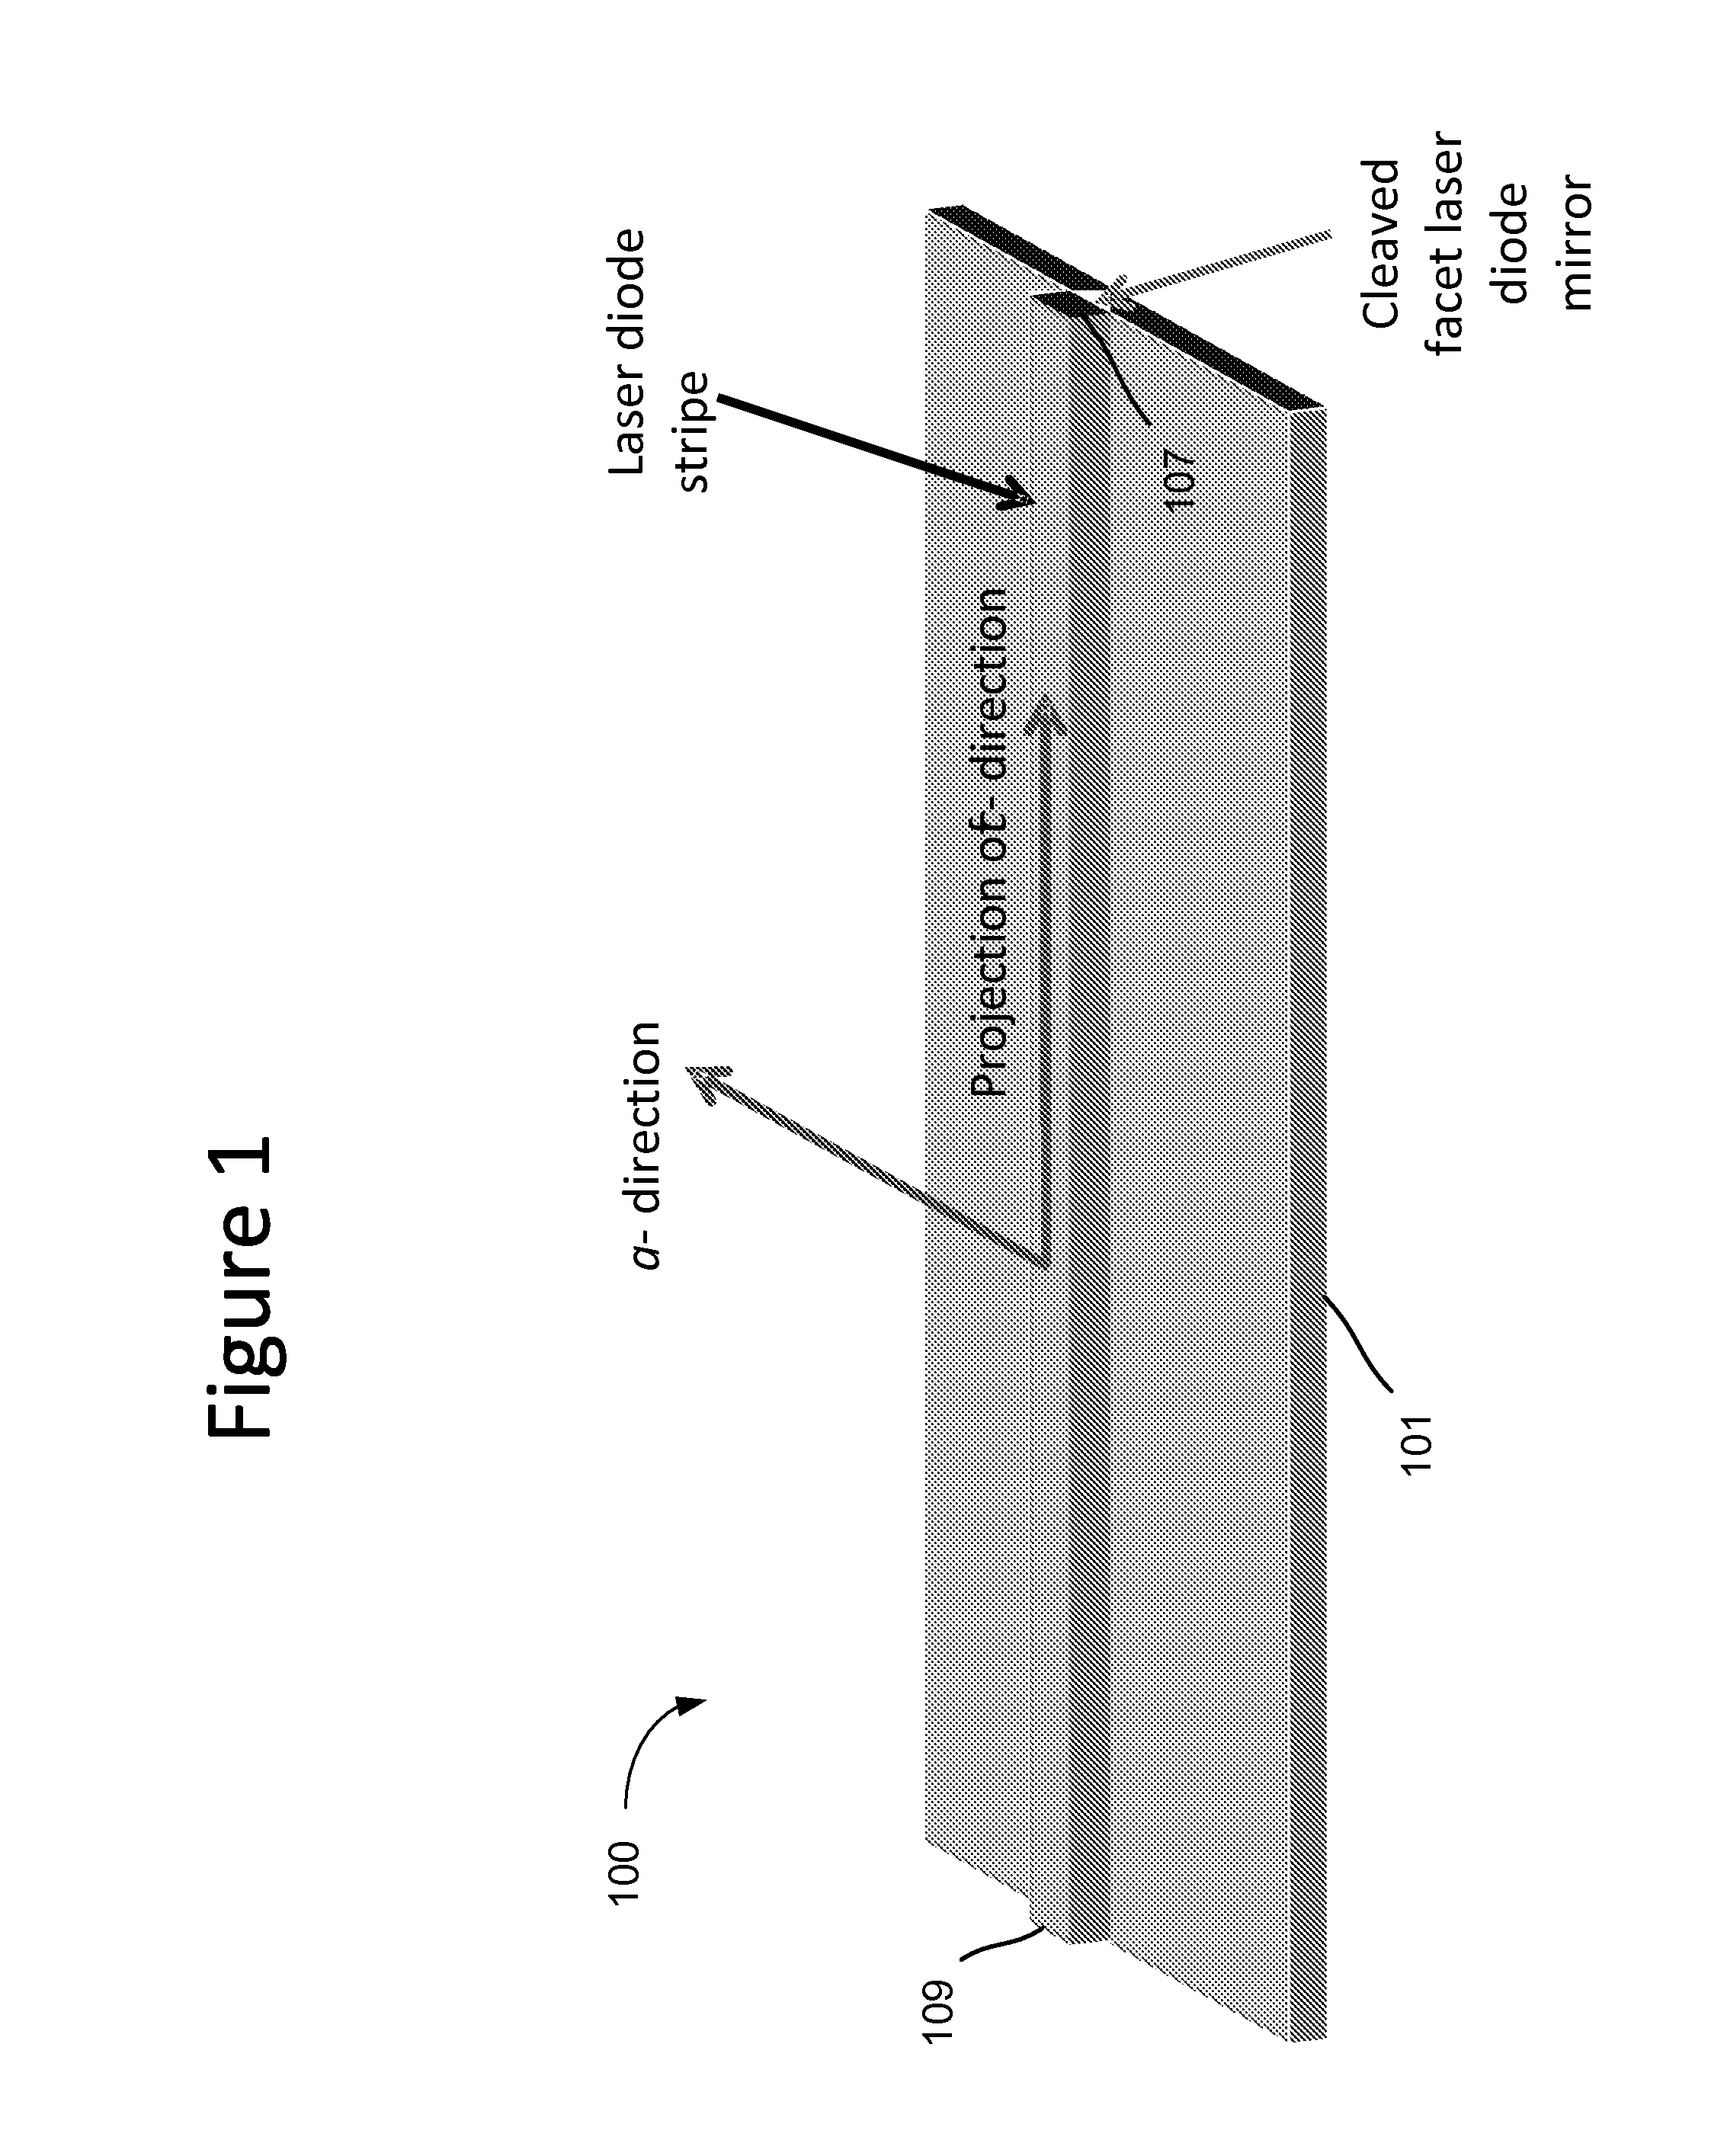 Laser diodes with scribe structures